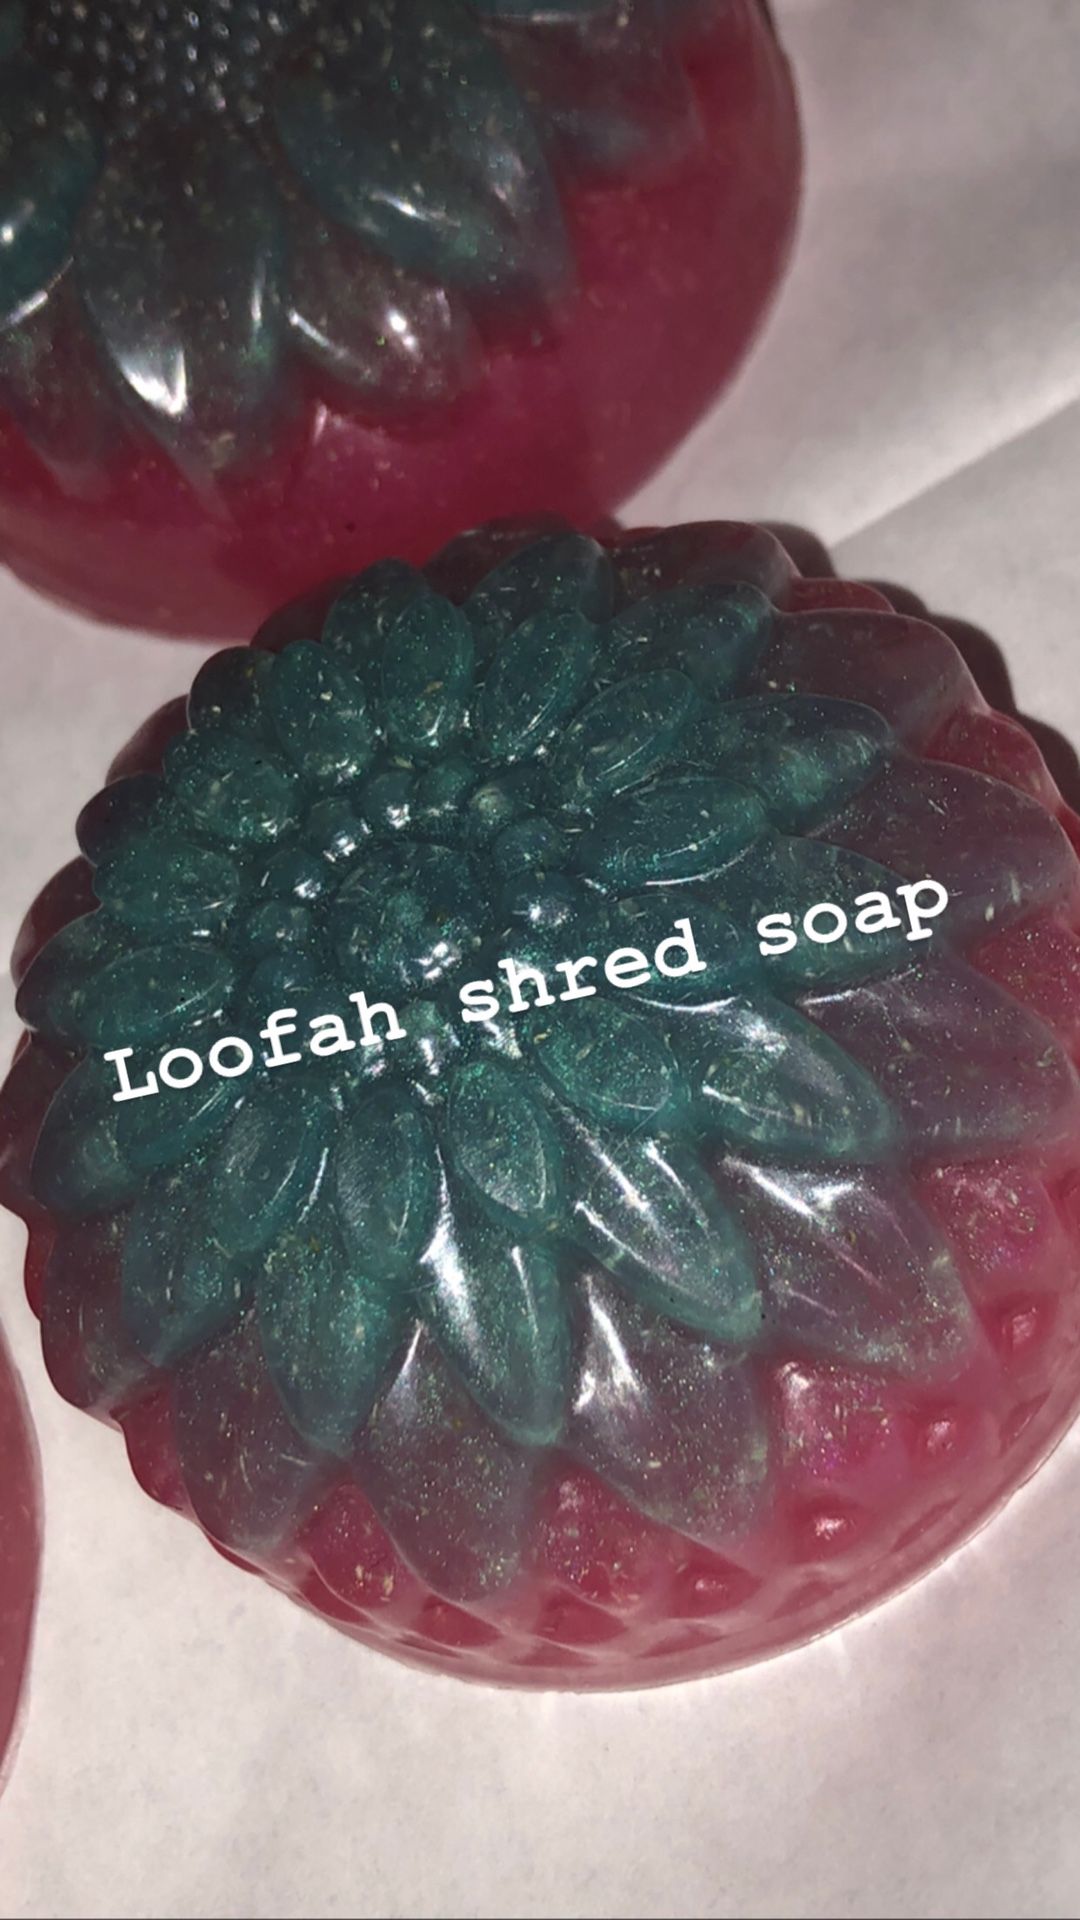 Loofah shred soaps scented in sex bomb